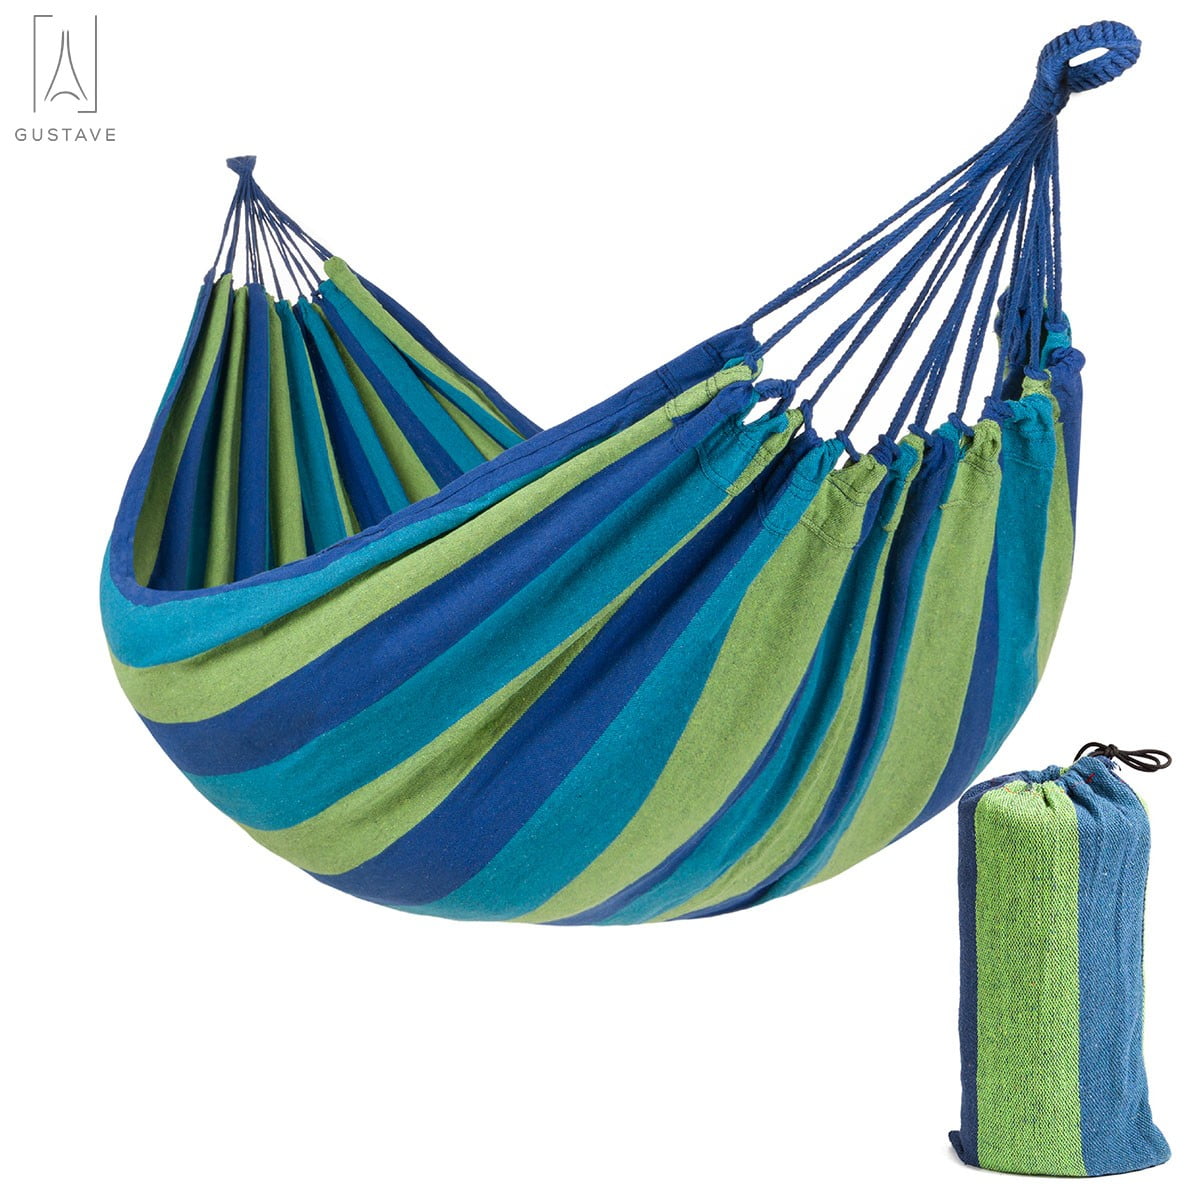 Details about   Portable Hammock 